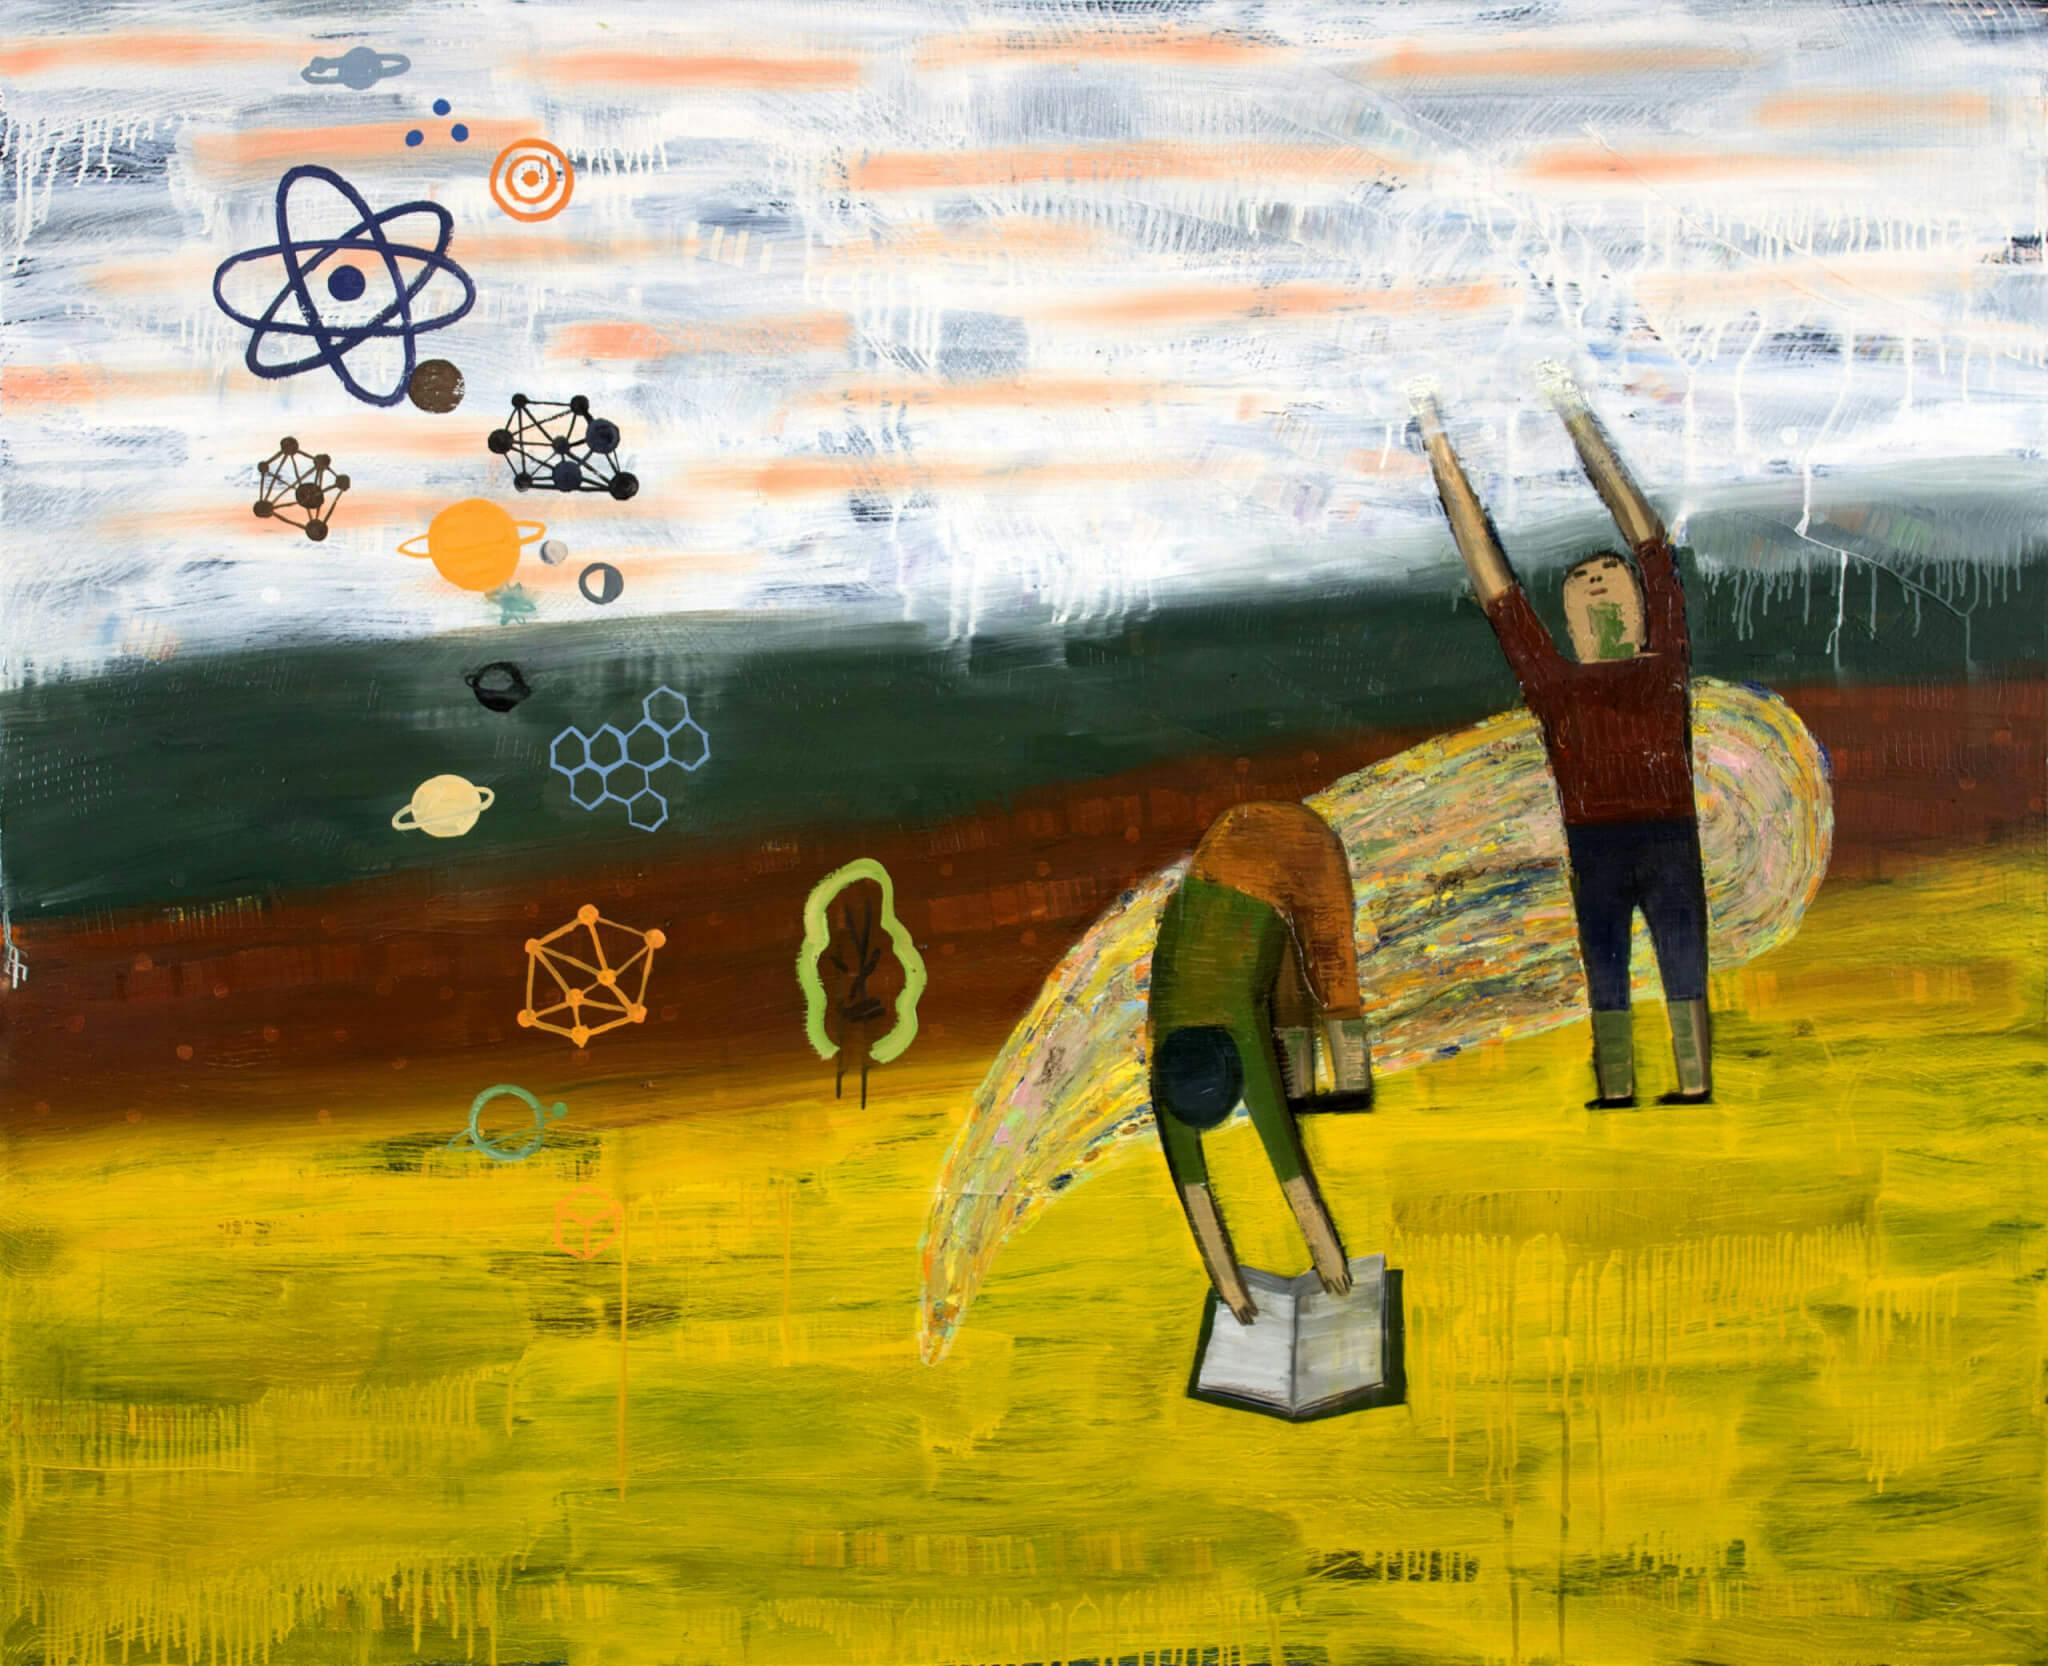 Charles Yuen's painting reveals two figures diving in opposite directions, while the structure of an atom hovers overhead, alongside other symbols.